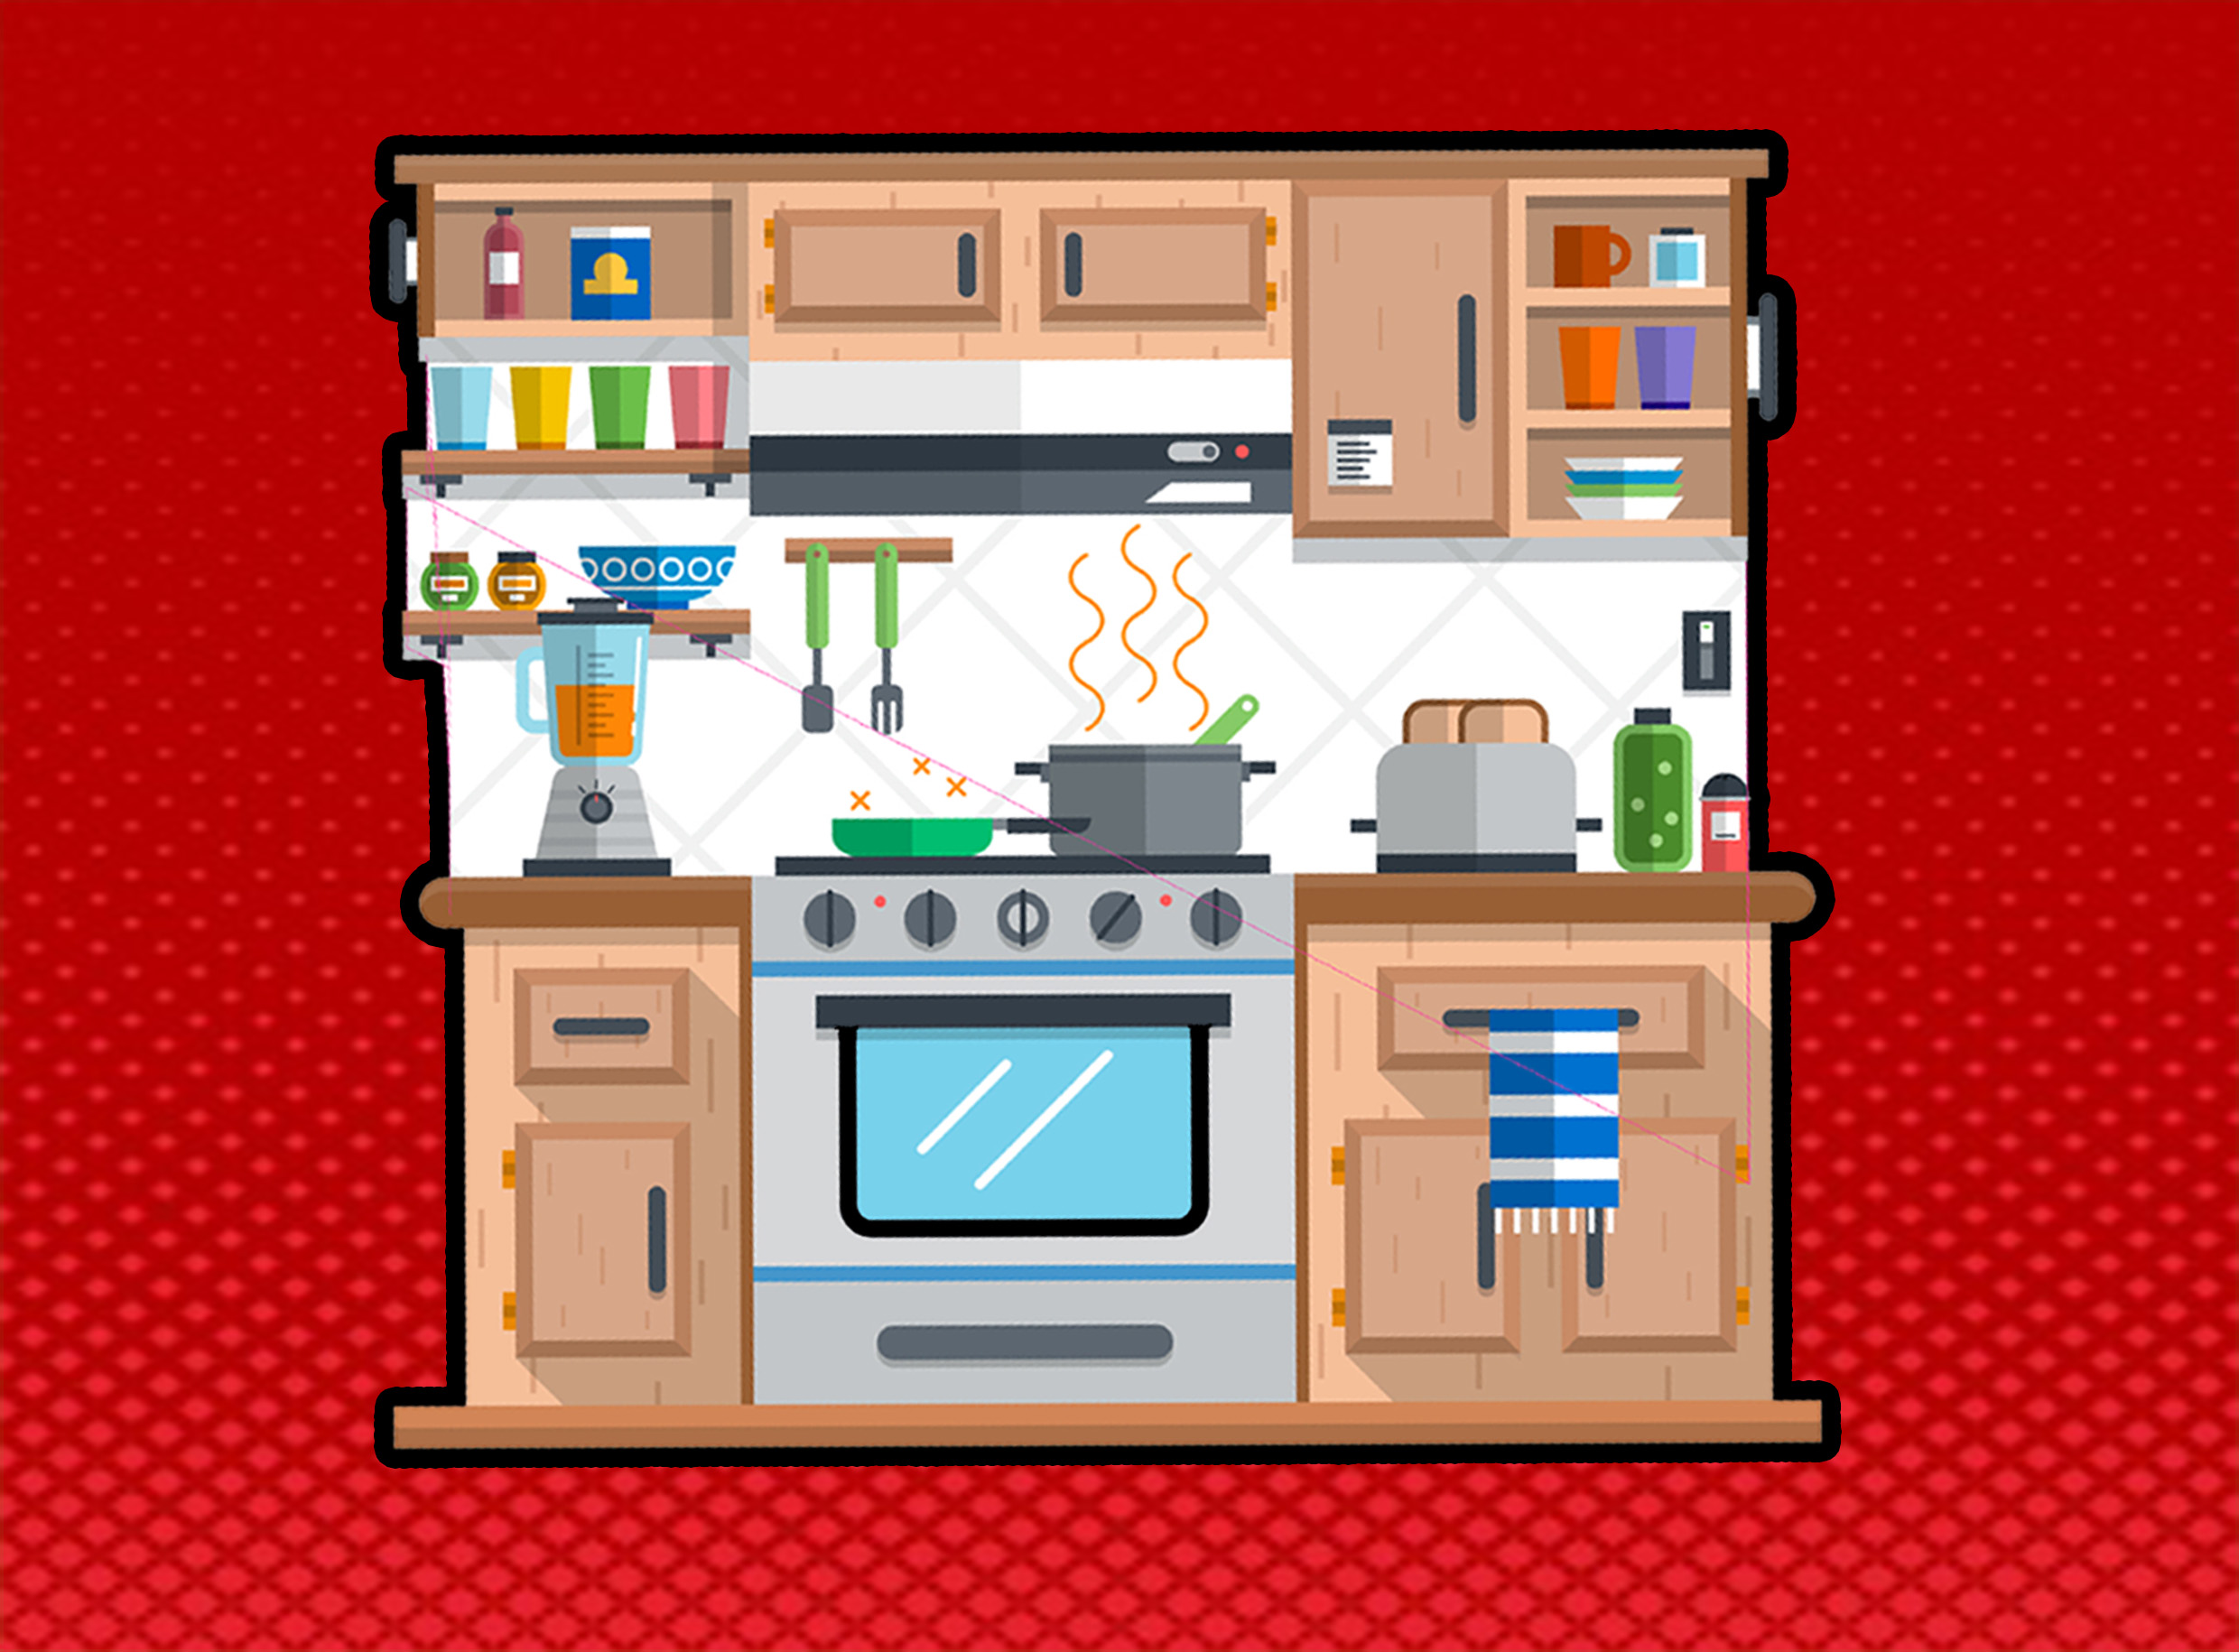  Design Your Dream Kitchen with Daraz and We’lll Guess What Type of Cook You Are